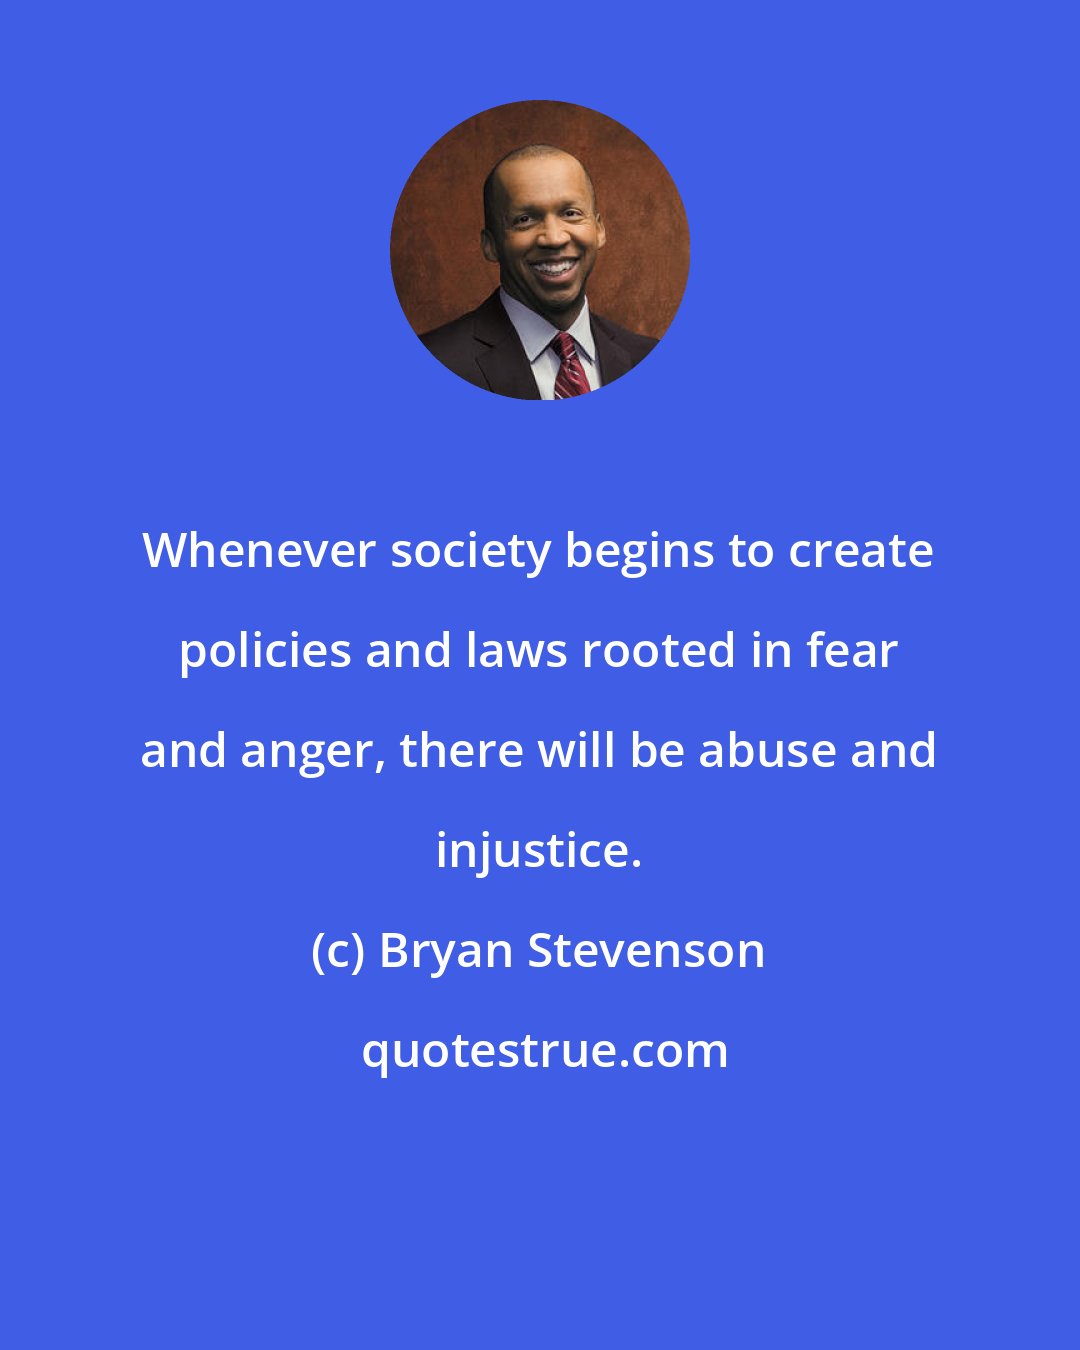 Bryan Stevenson: Whenever society begins to create policies and laws rooted in fear and anger, there will be abuse and injustice.